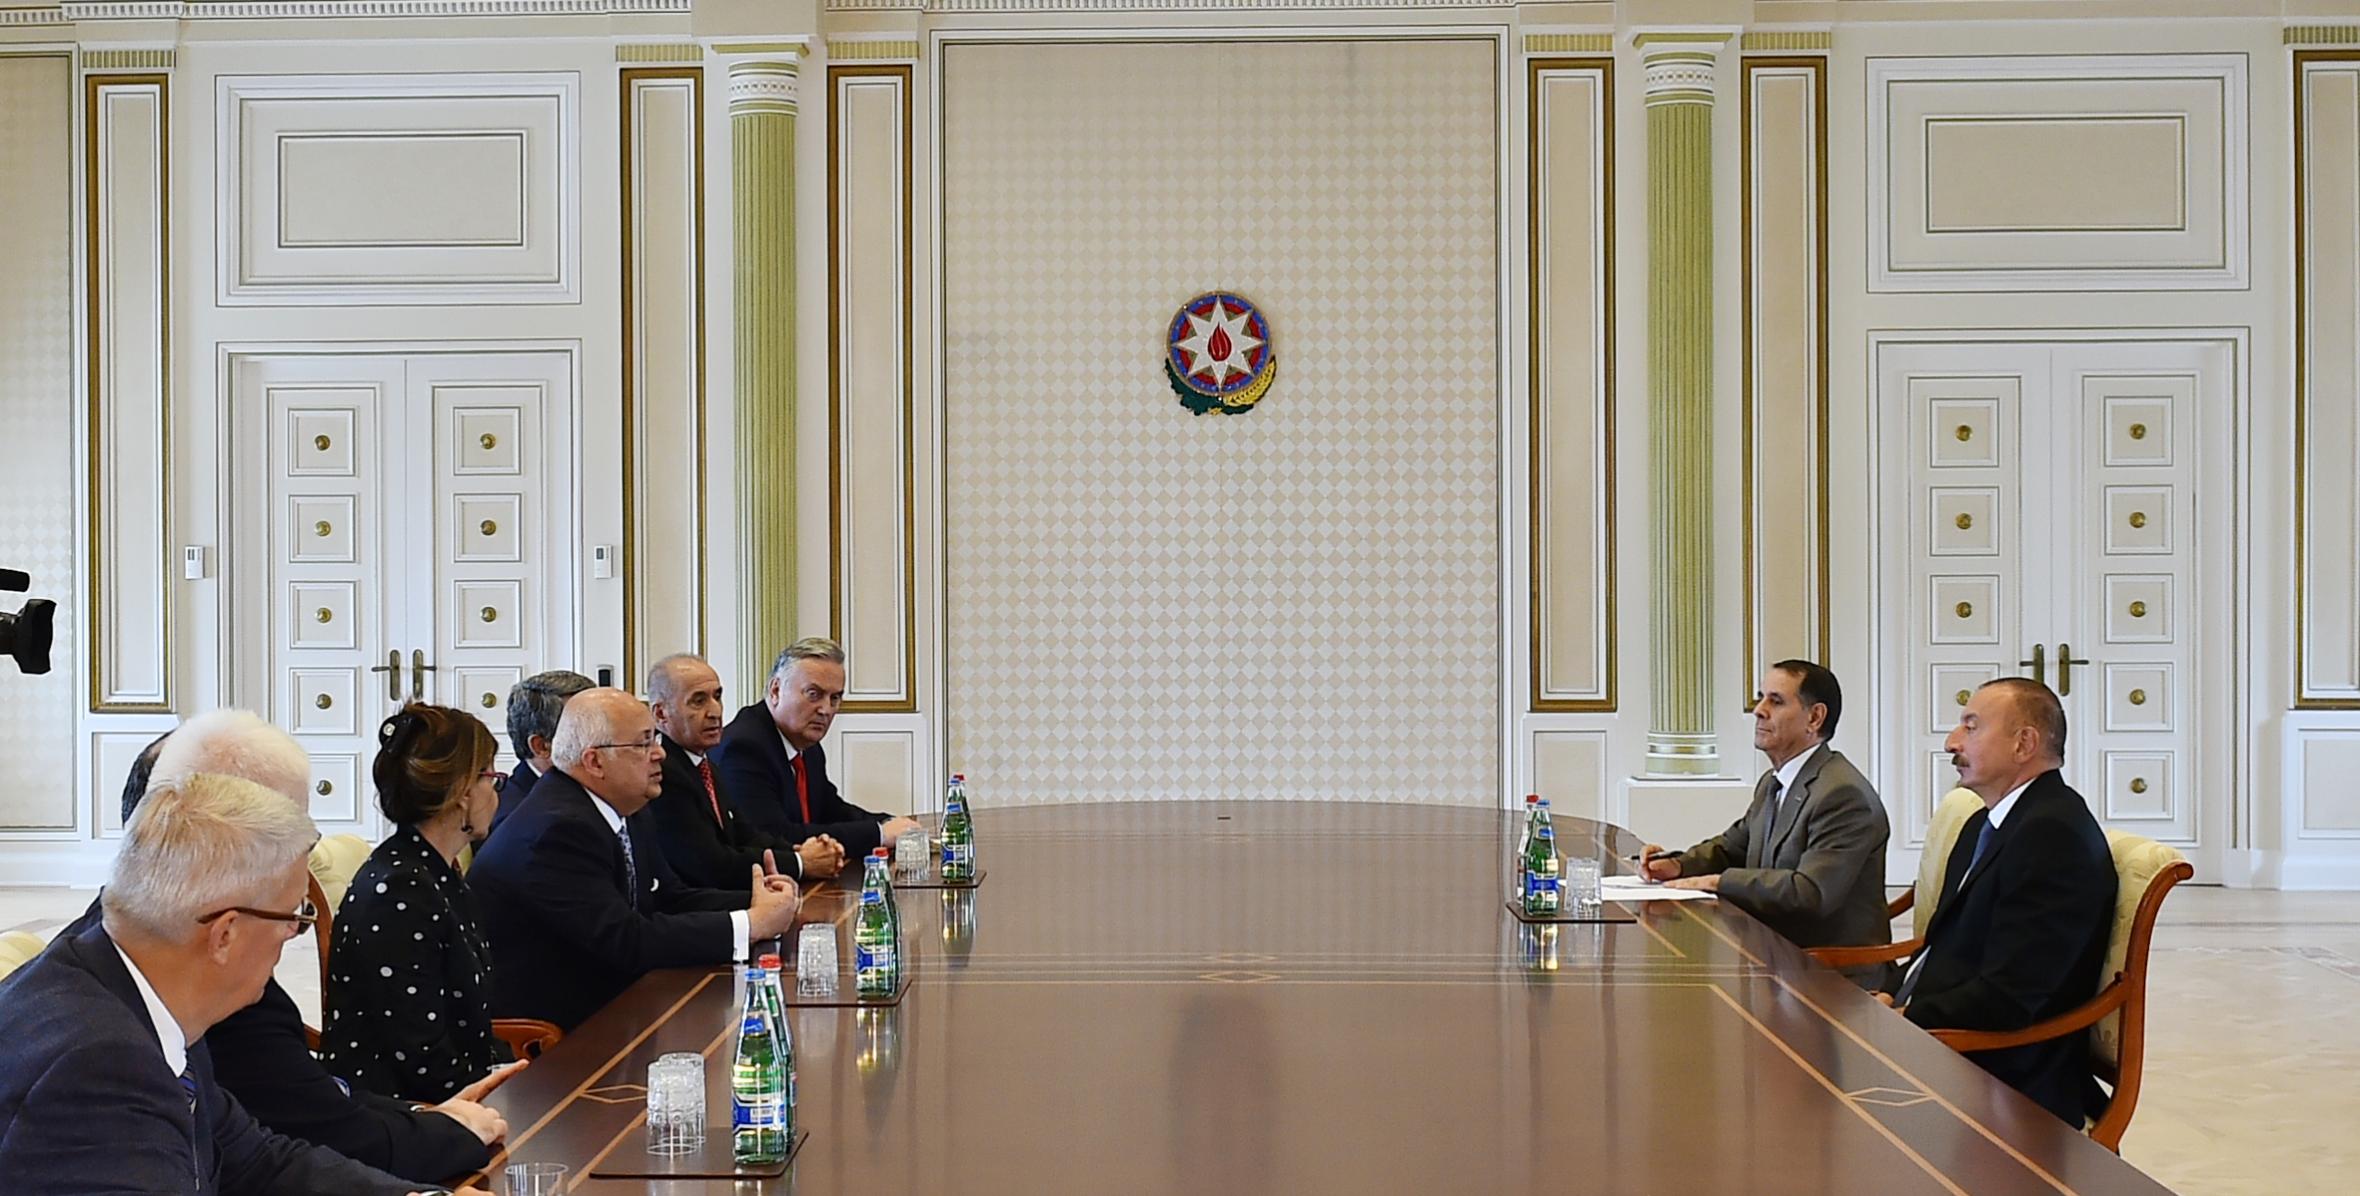 Ilham Aliyev received former heads of state and government attending Global Young Leaders Forum